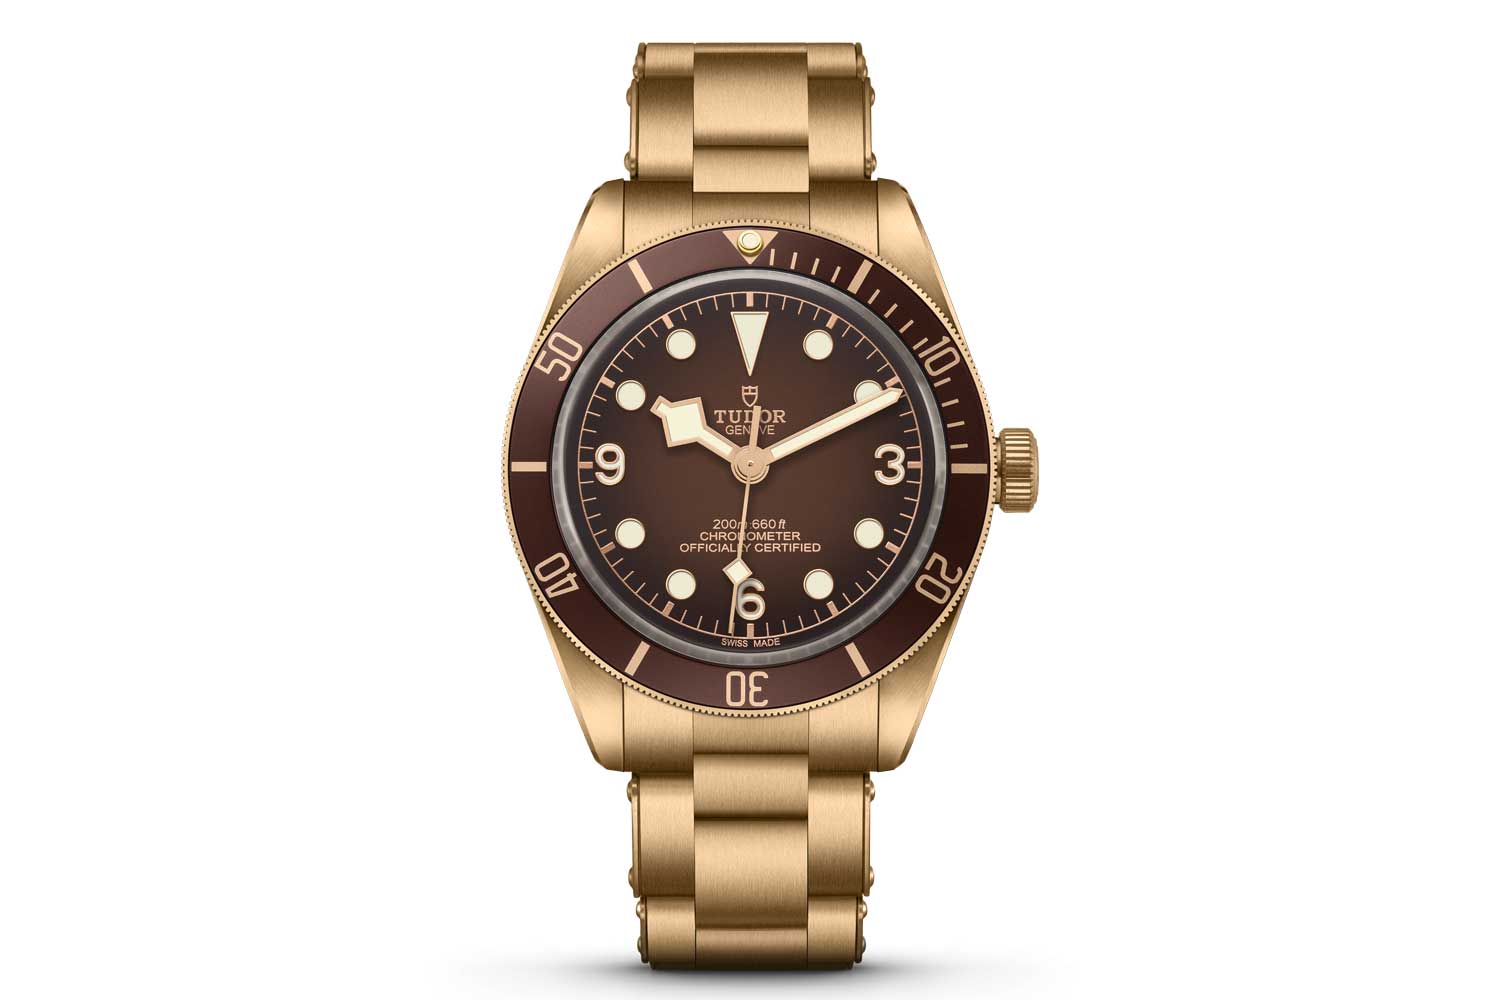 The new 58 Bronze takes its lead from the first iteration of the Bronze watch, with a brown dial and bezel insert.